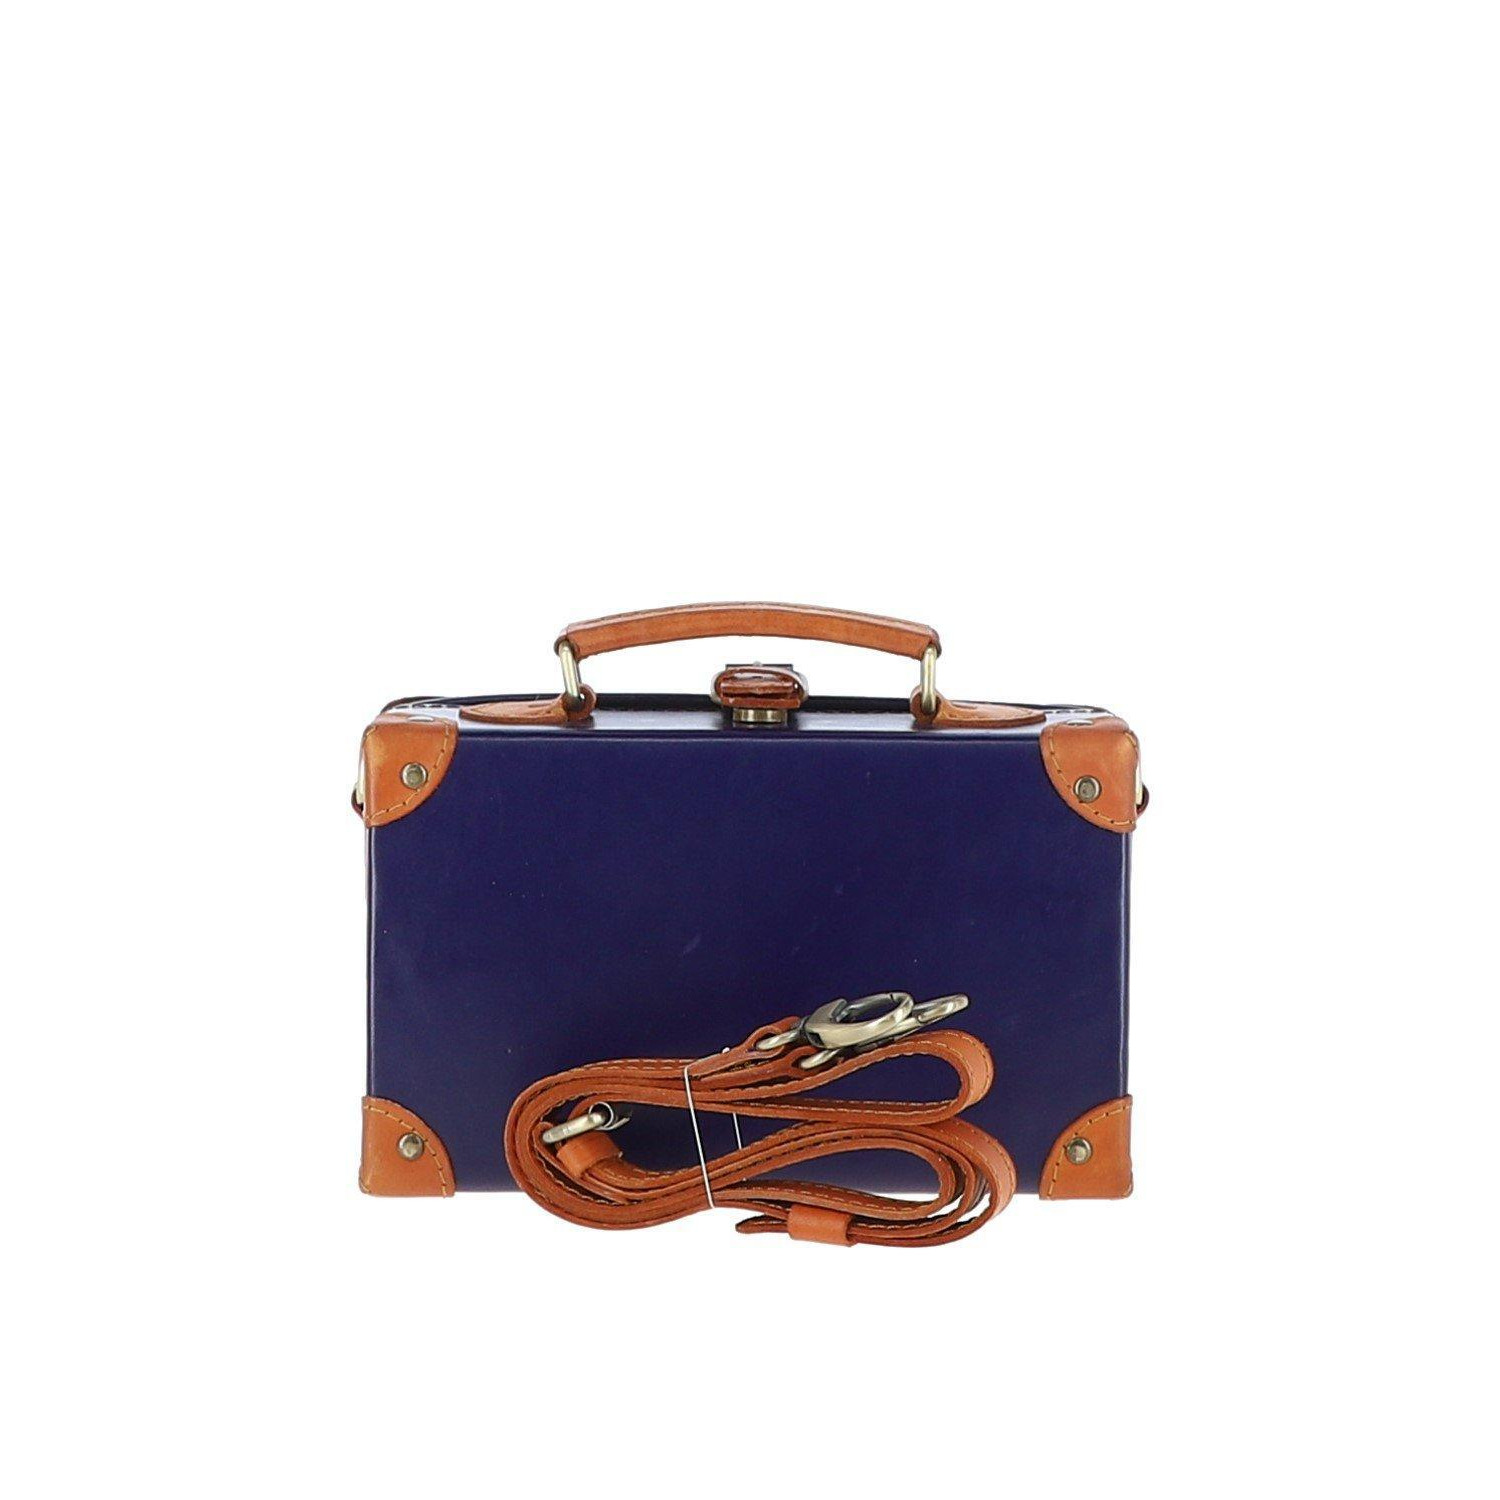 'Tramonto' Home Accessory Exquisite Leather Box - image 1